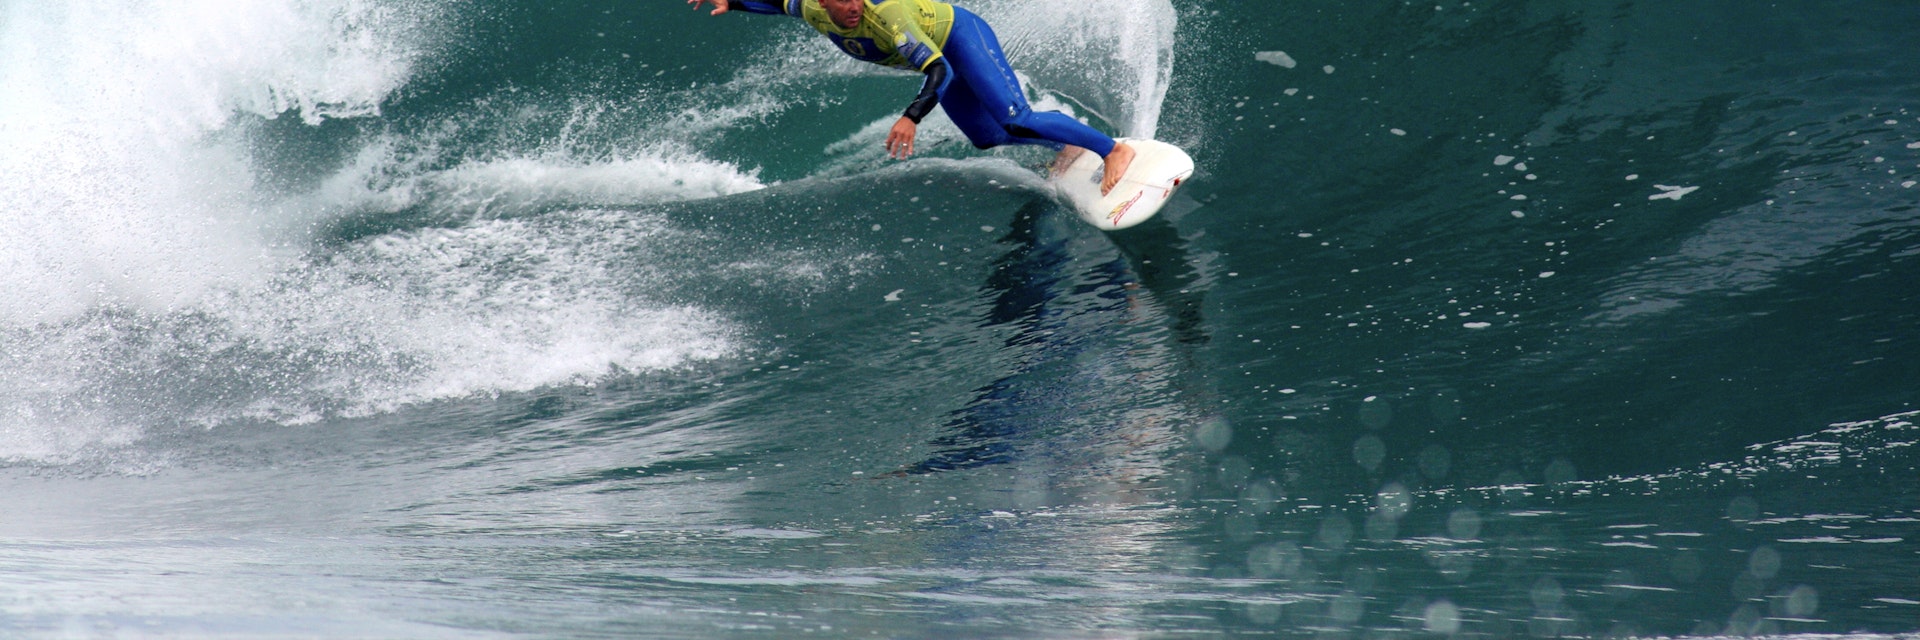 Professional surfer on a wave known as El Gringo.